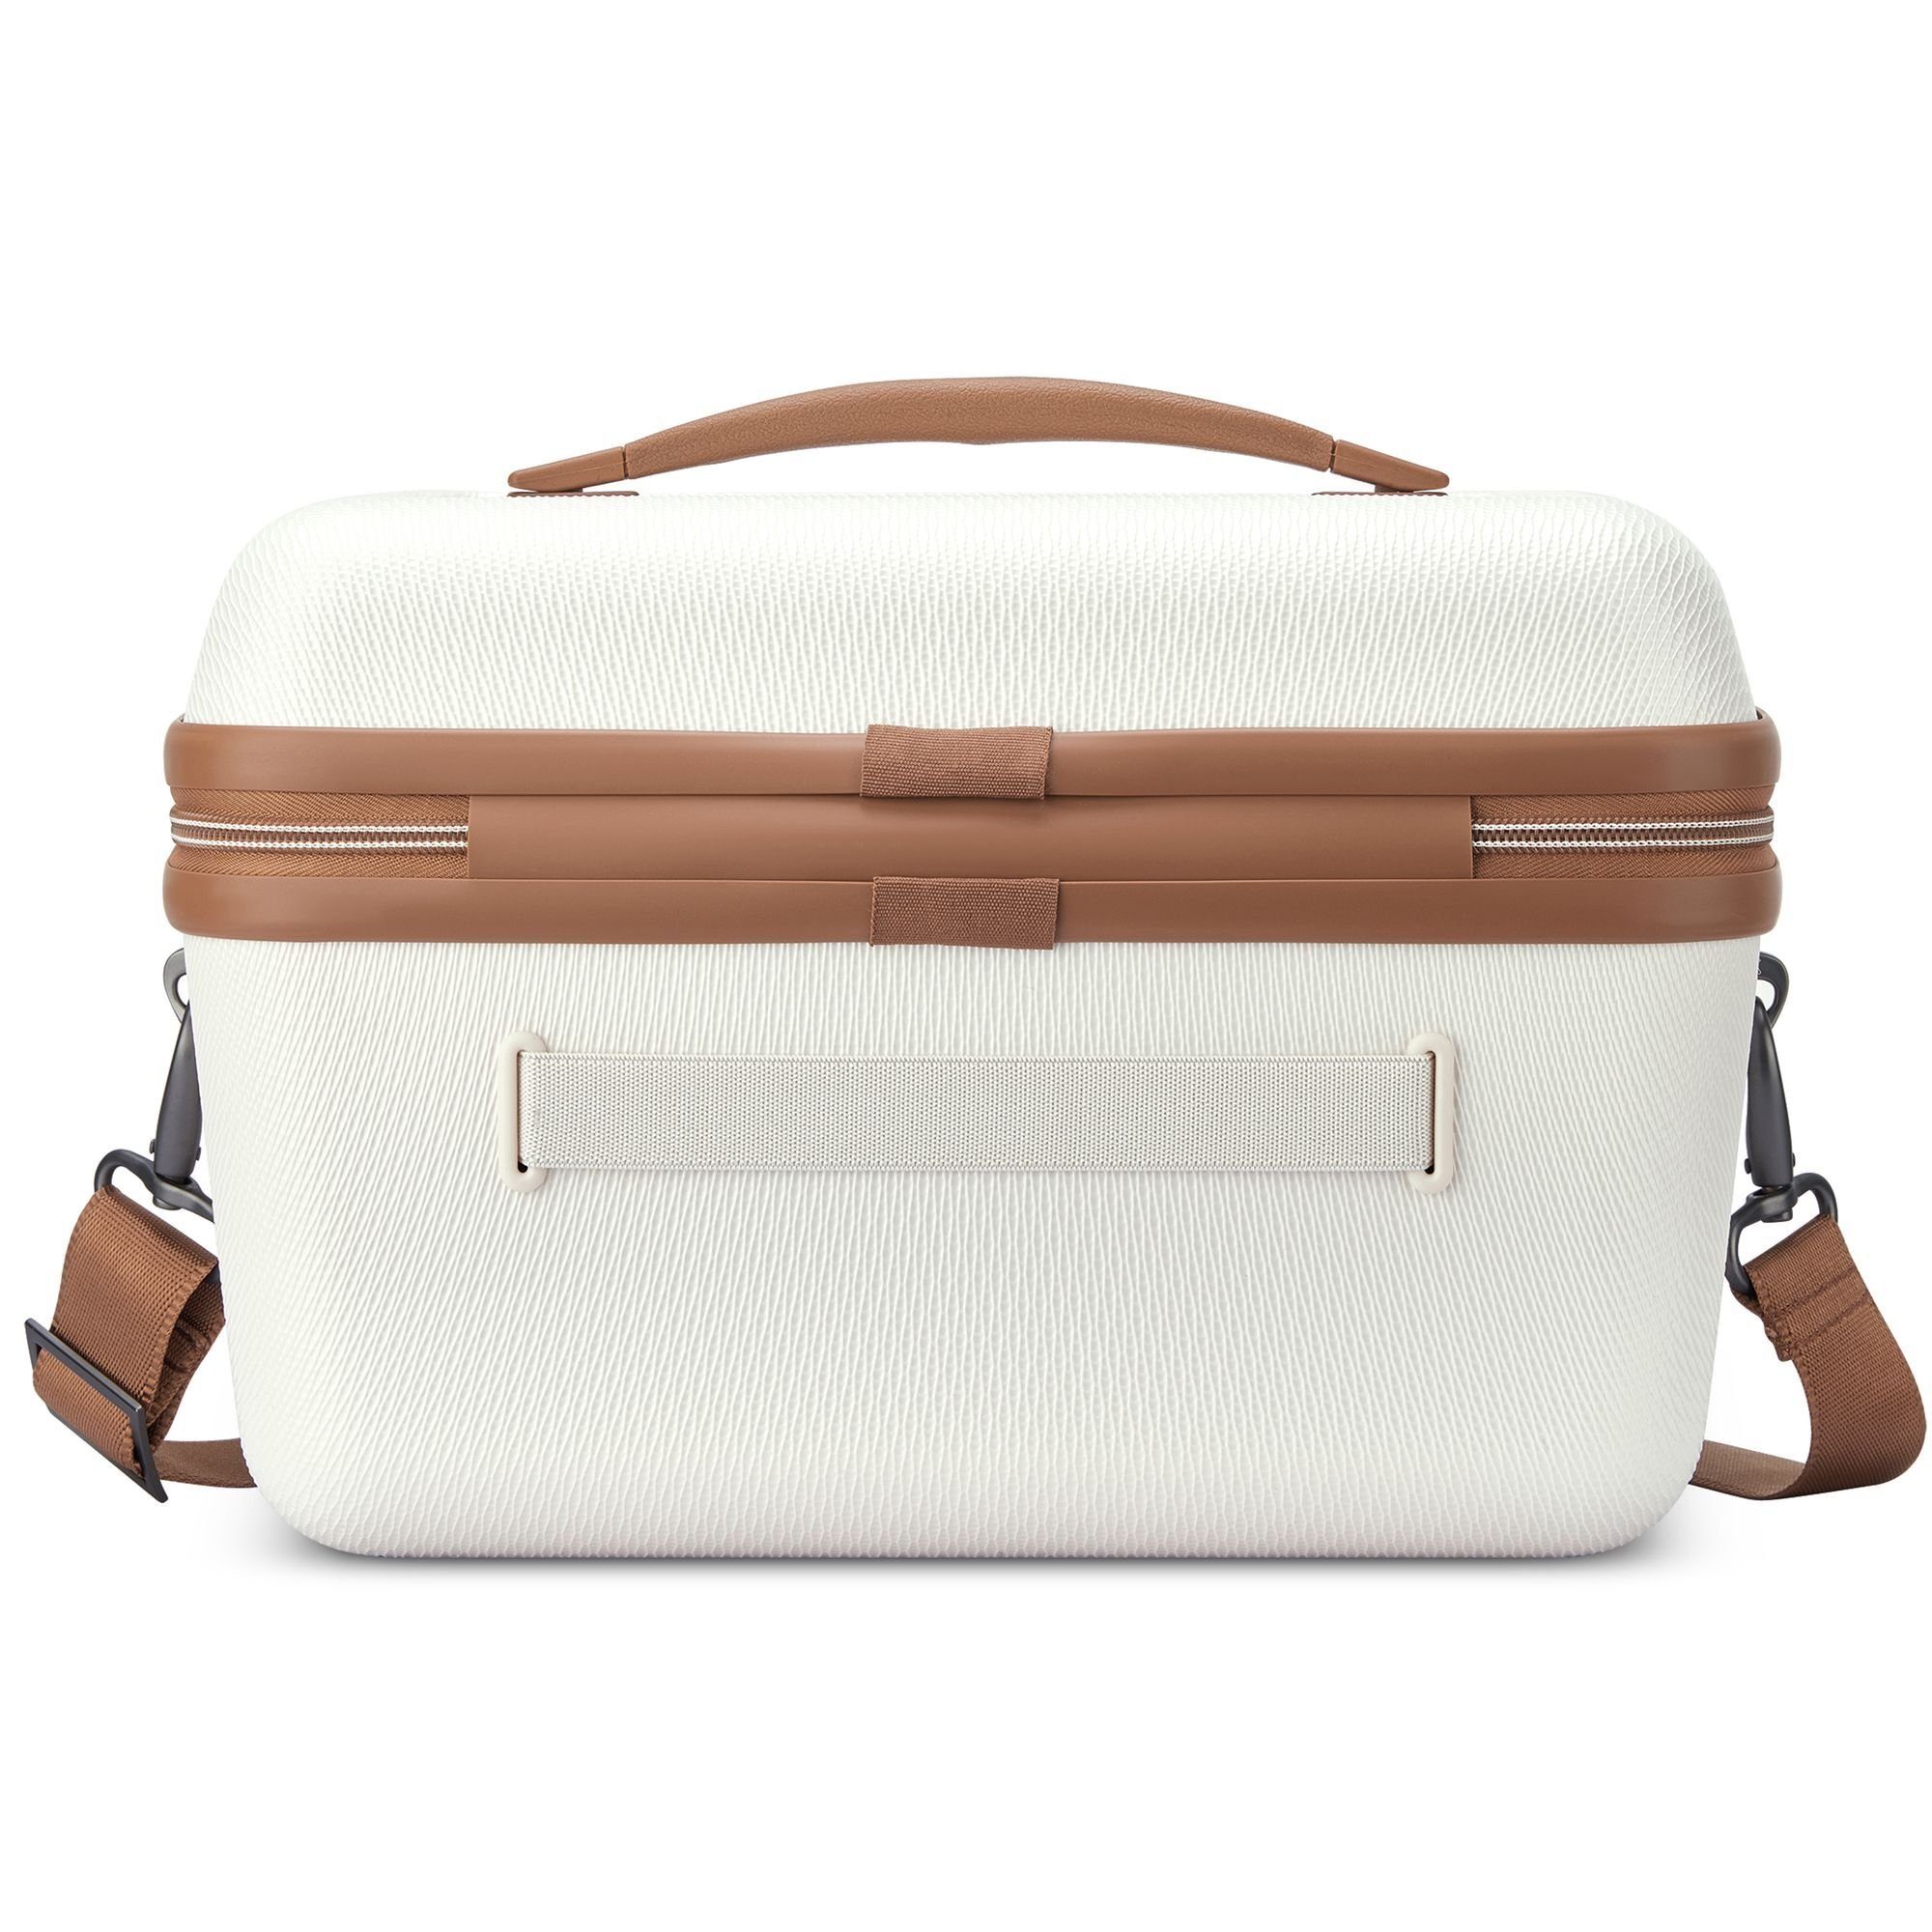 Chatelet Air angora Polycarbonat 2.0, Beautycase Delsey